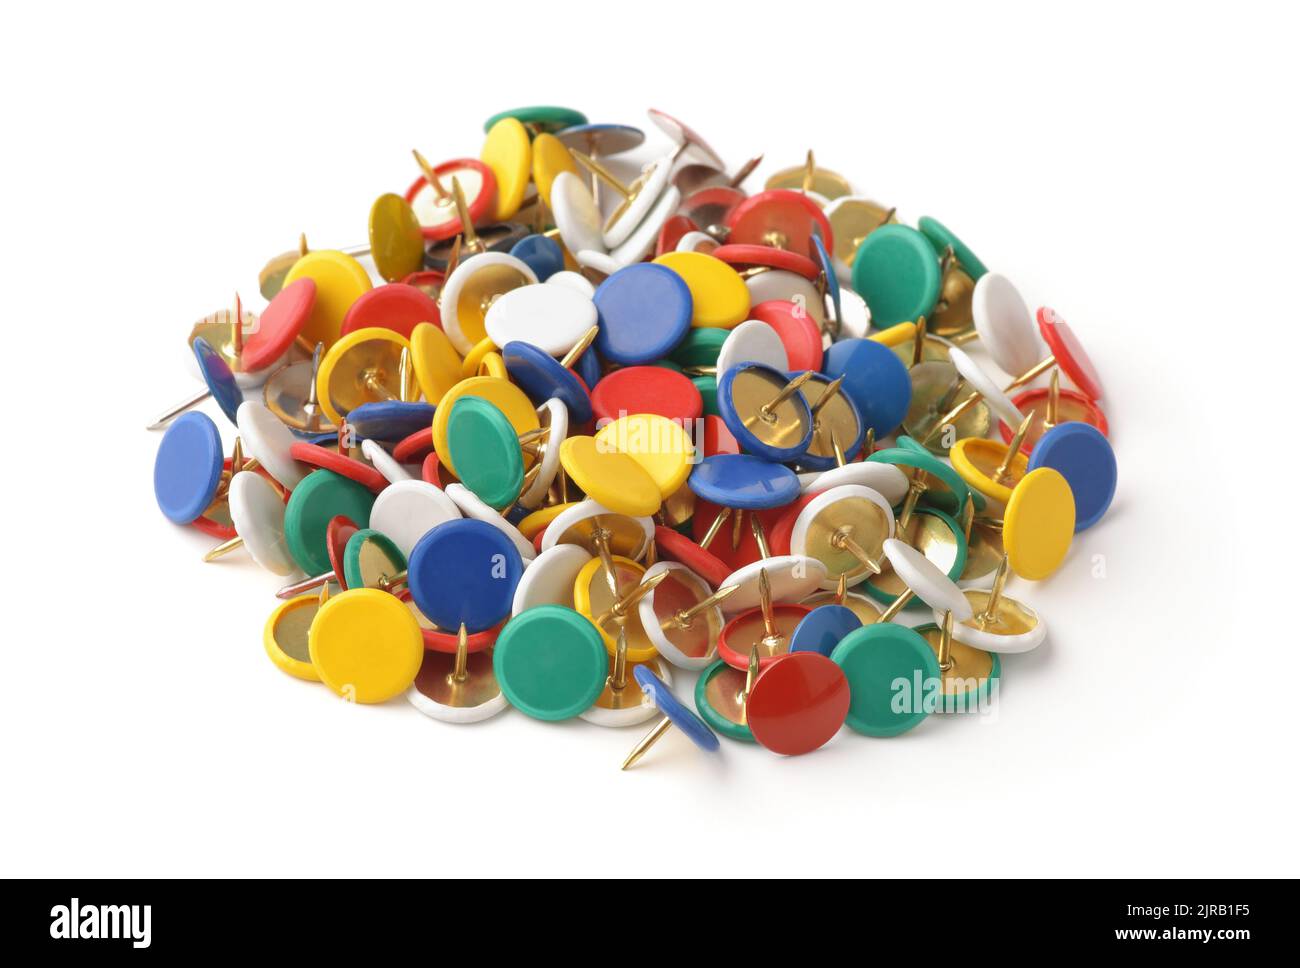 Pile of colorful metal thumb tacks isolated on white Stock Photo